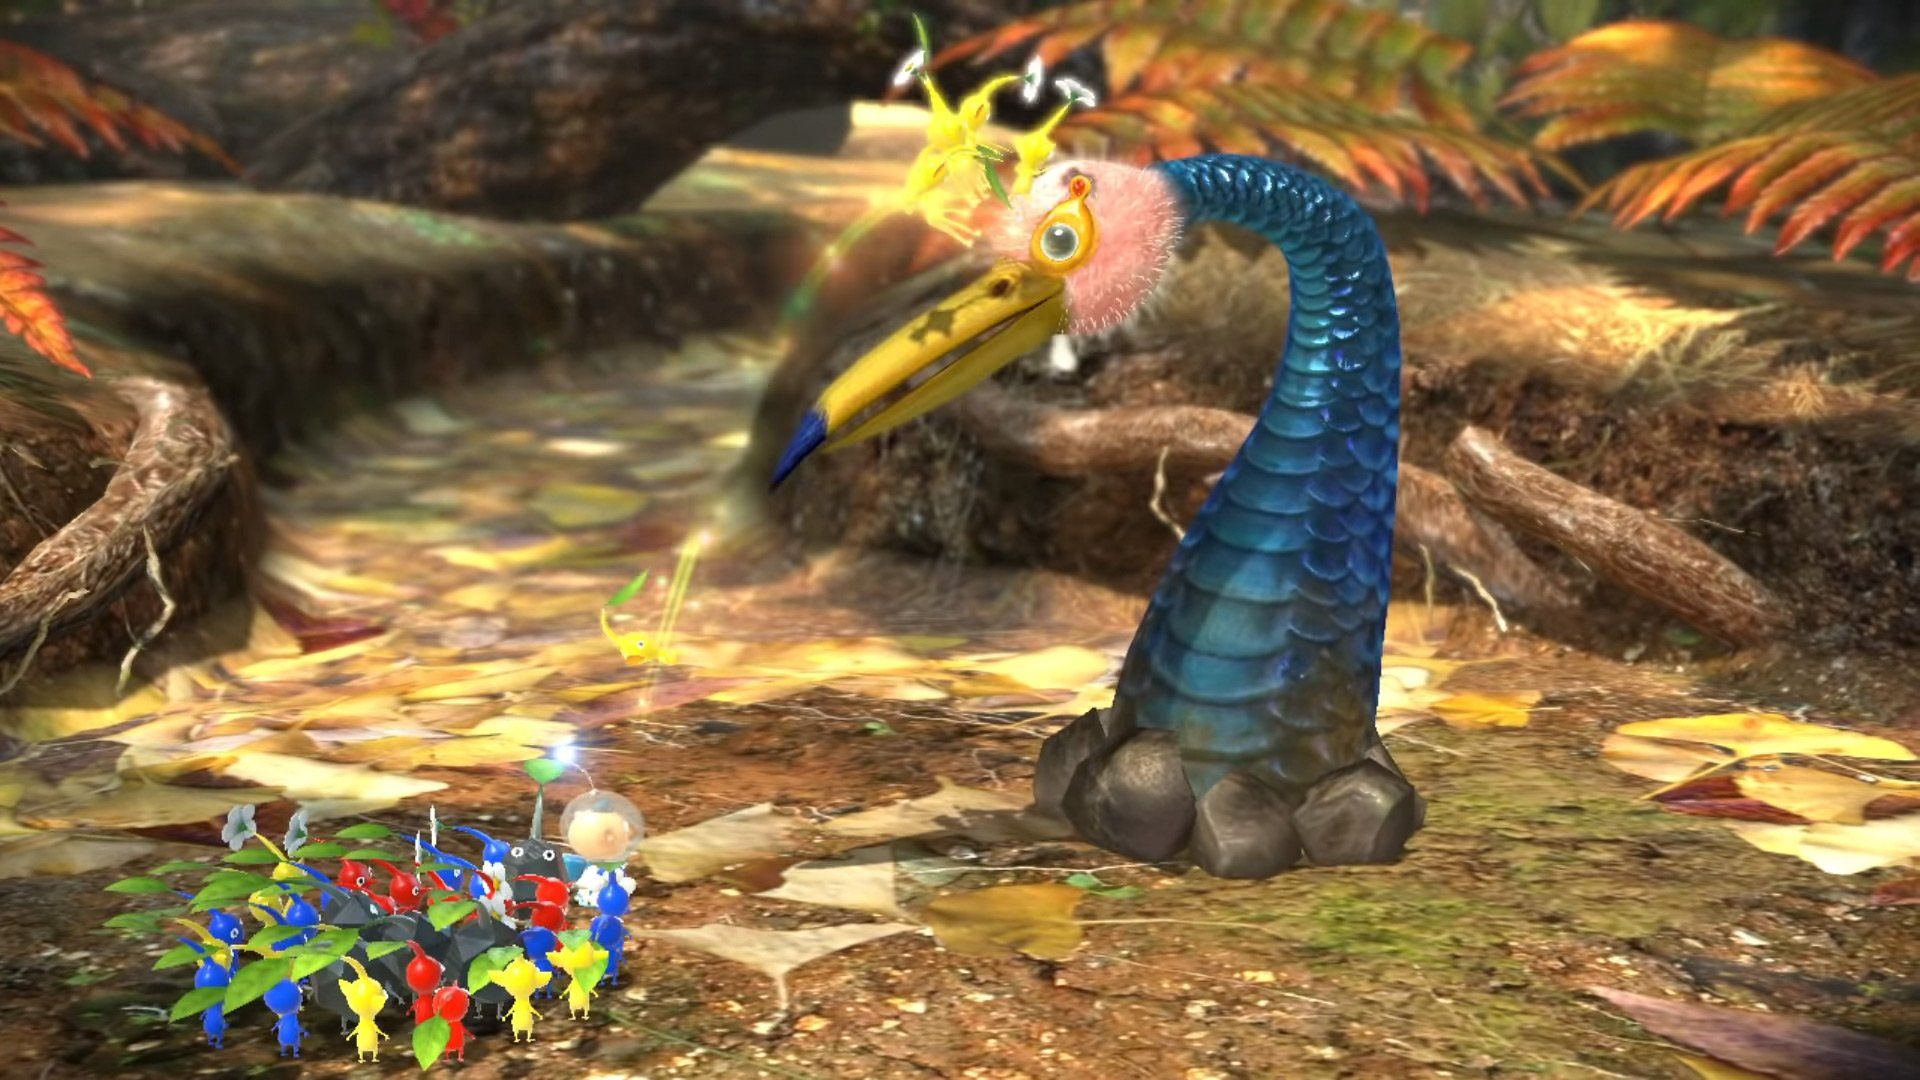 This Pikmin 3 Deluxe video will get you up to speed with cute illustrations